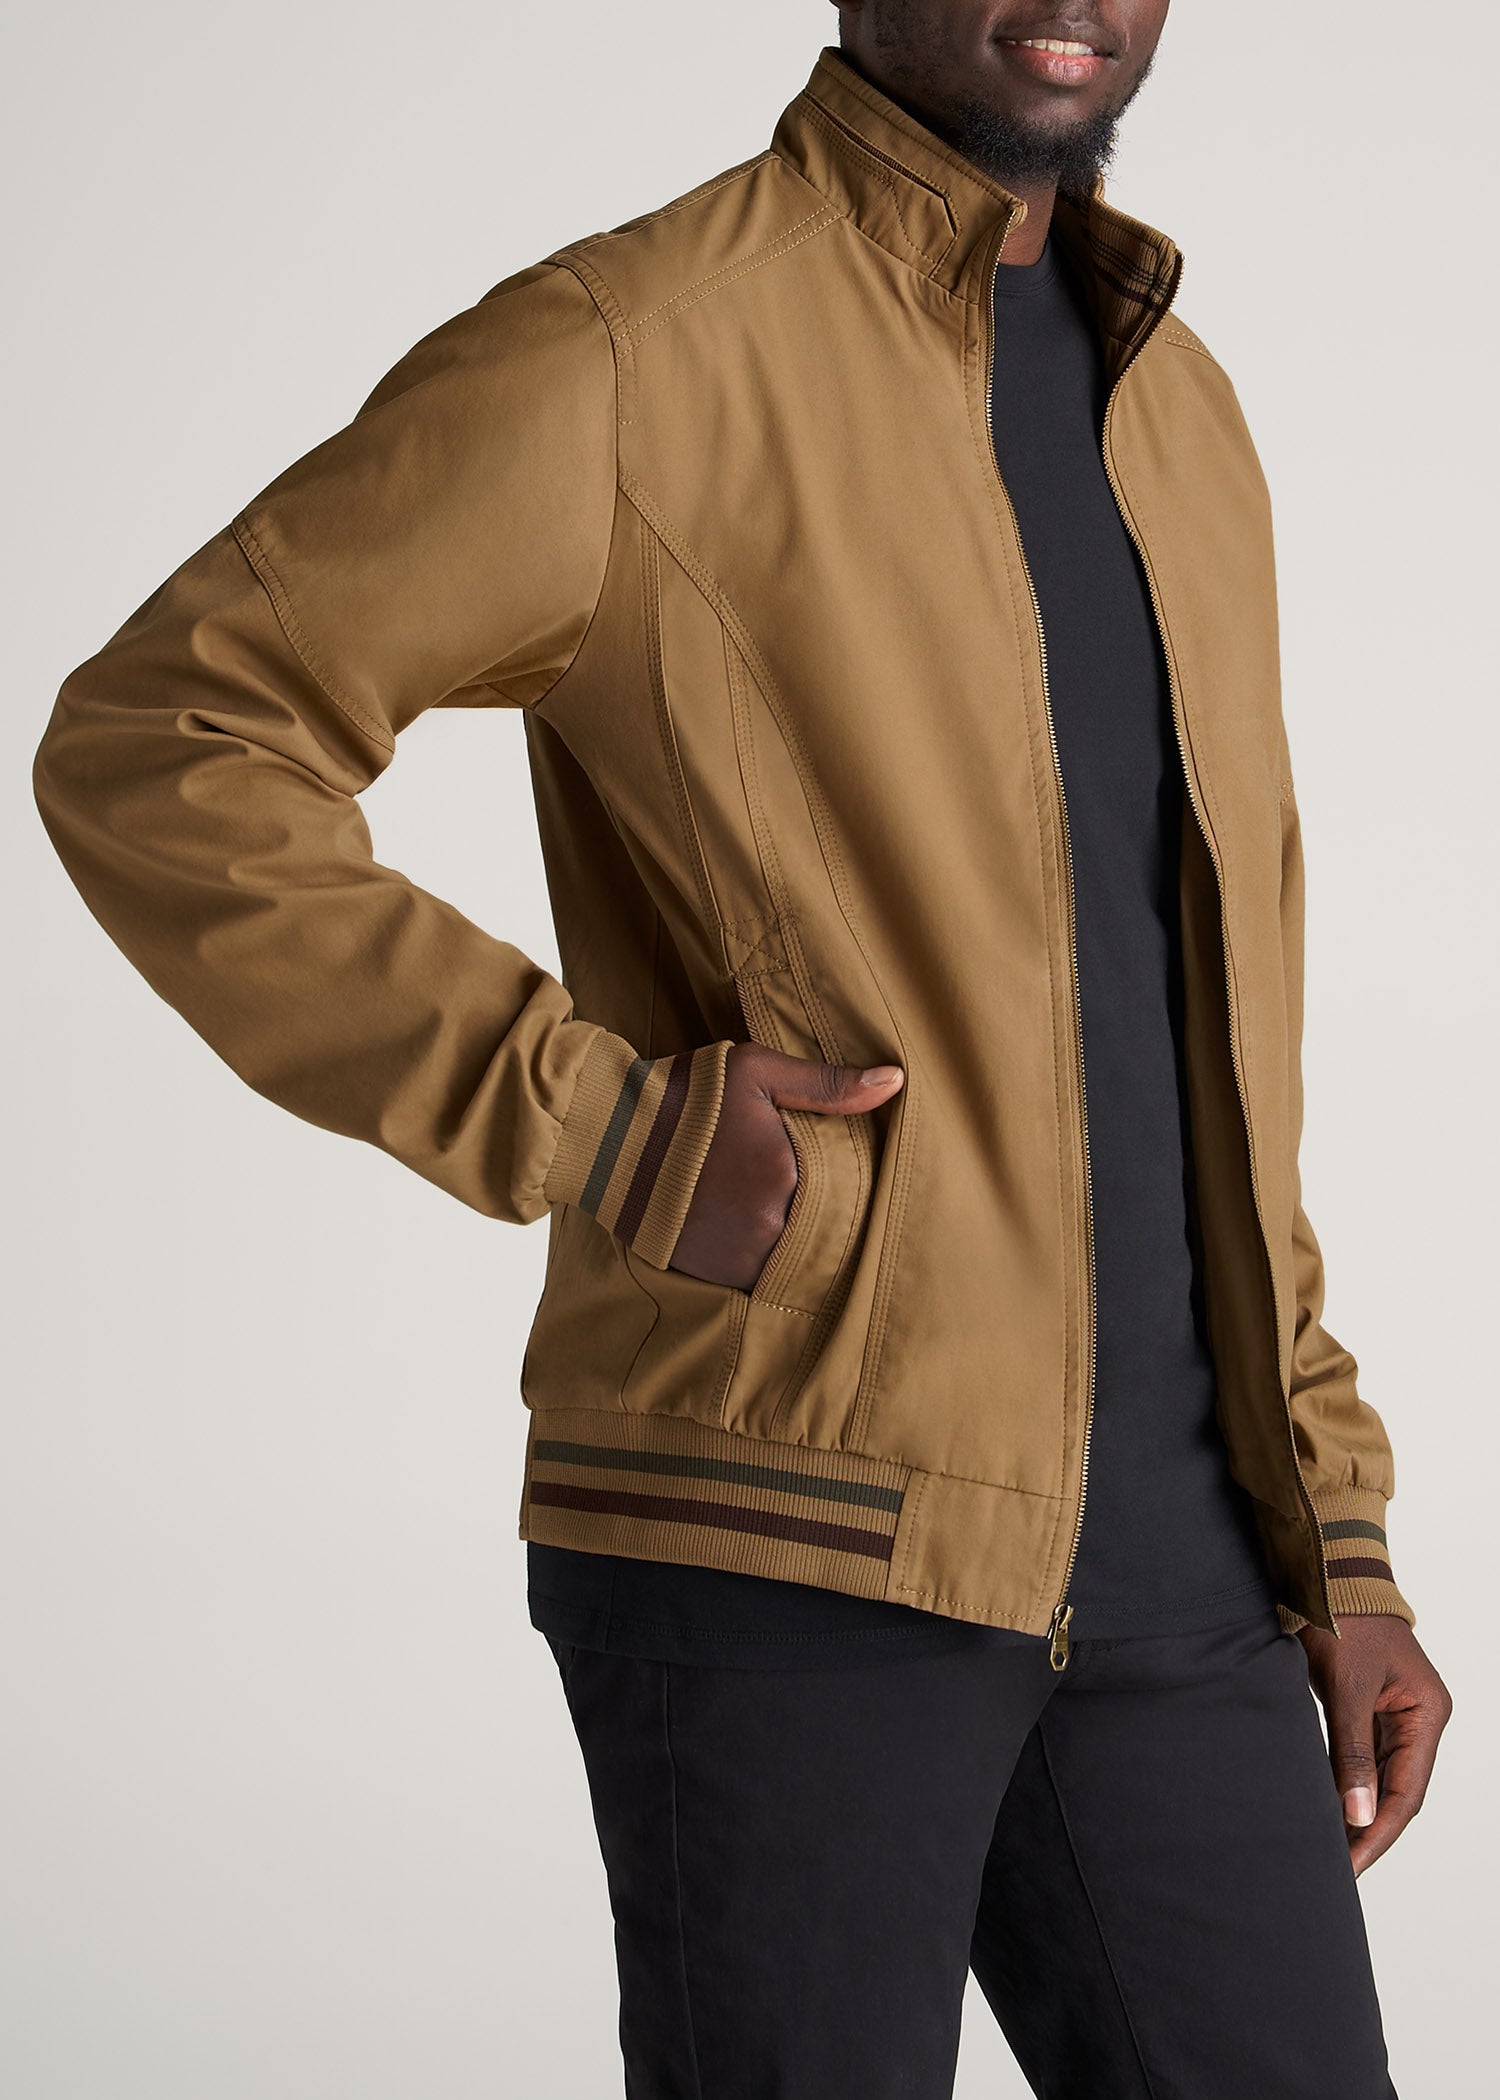 Last Crusade Jacket in Brown Cotton – Wested Leather Co